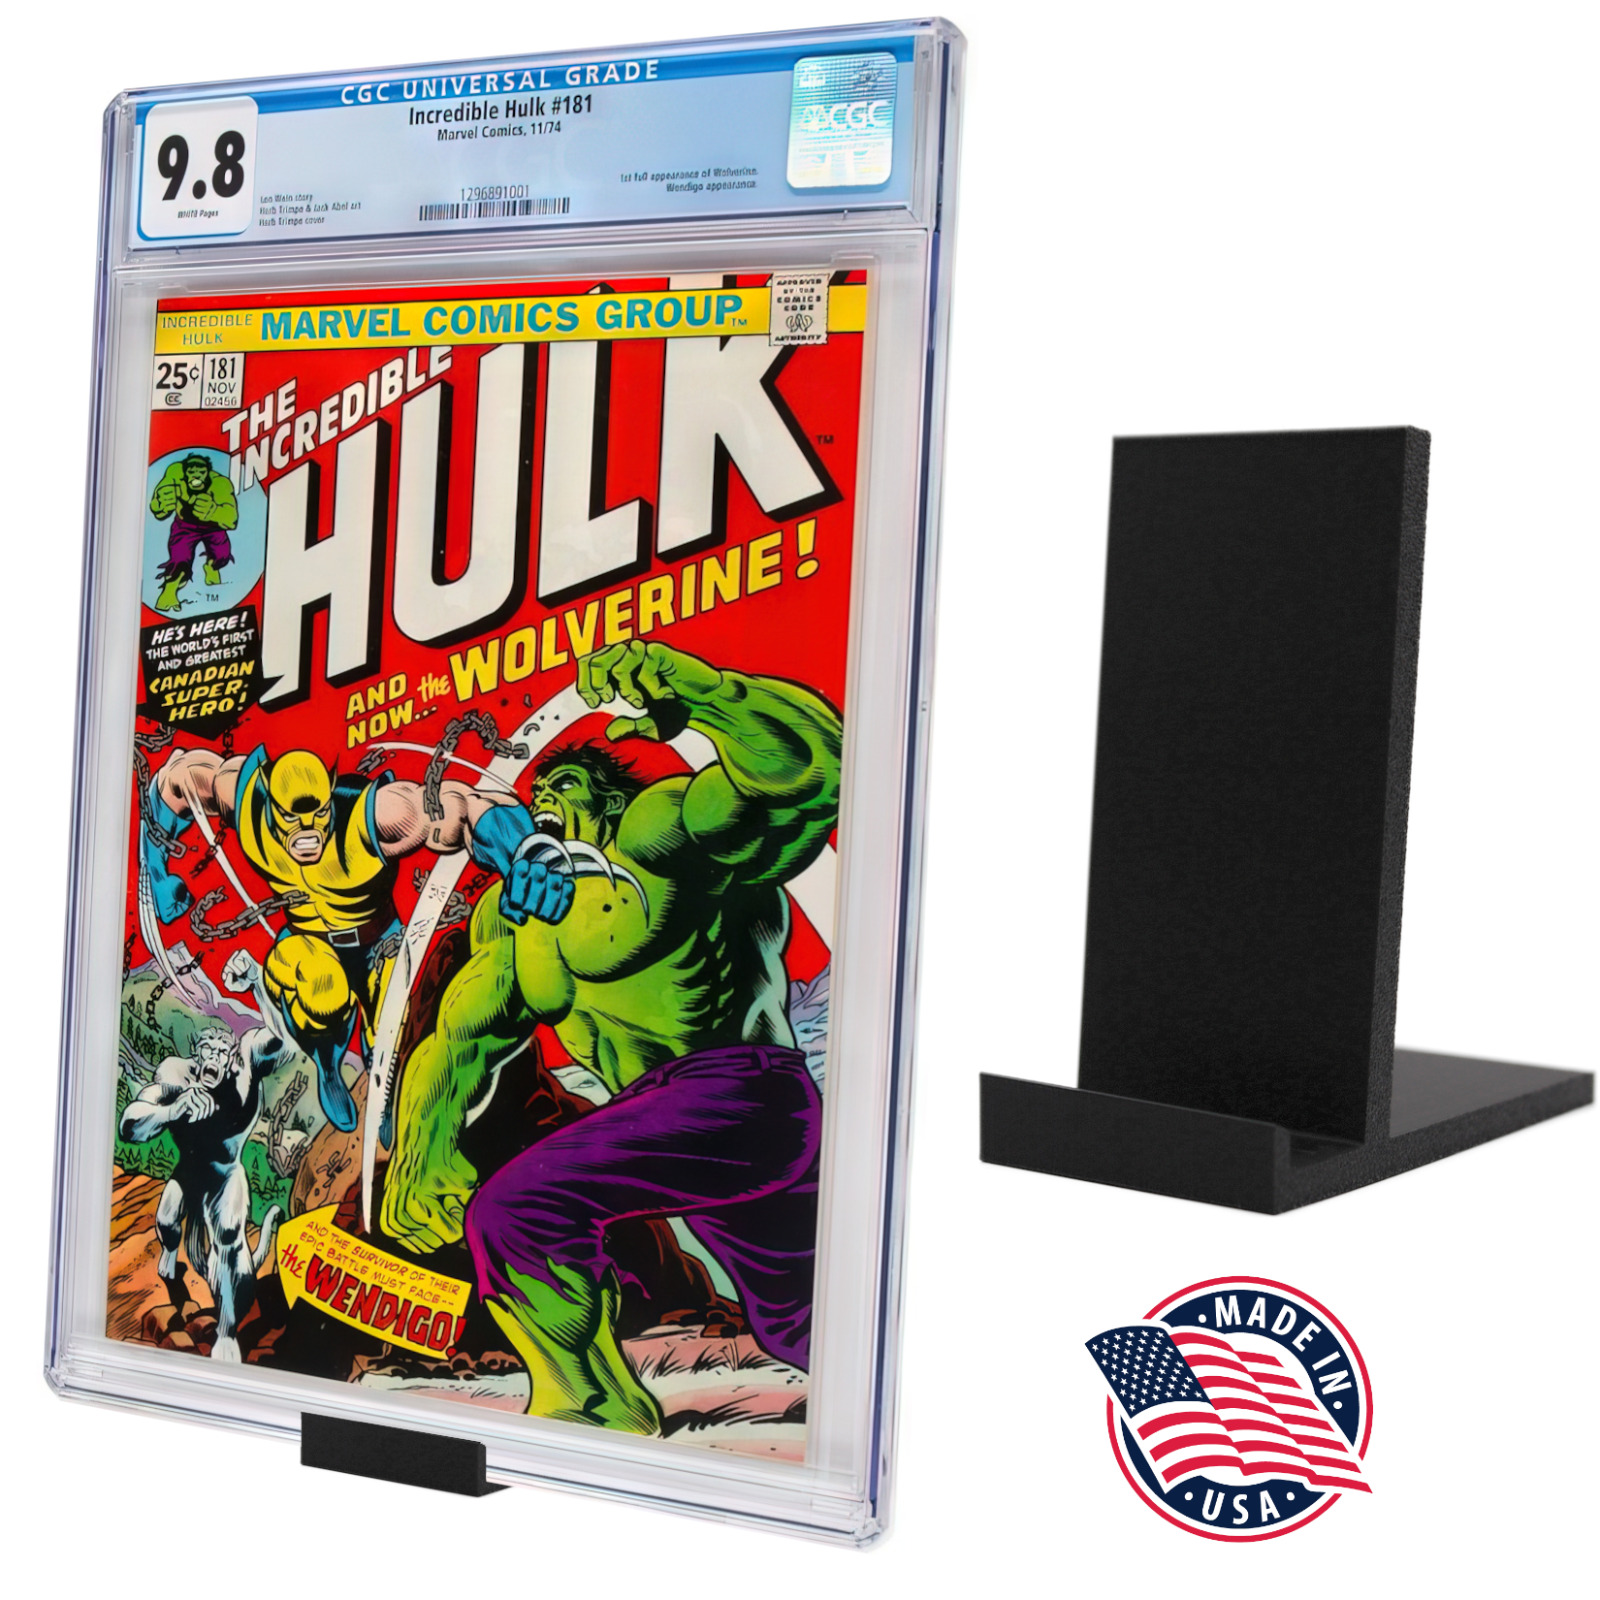 Comic Book Display Stand Great For Graded CGC, CBCS And Non-Graded Comics